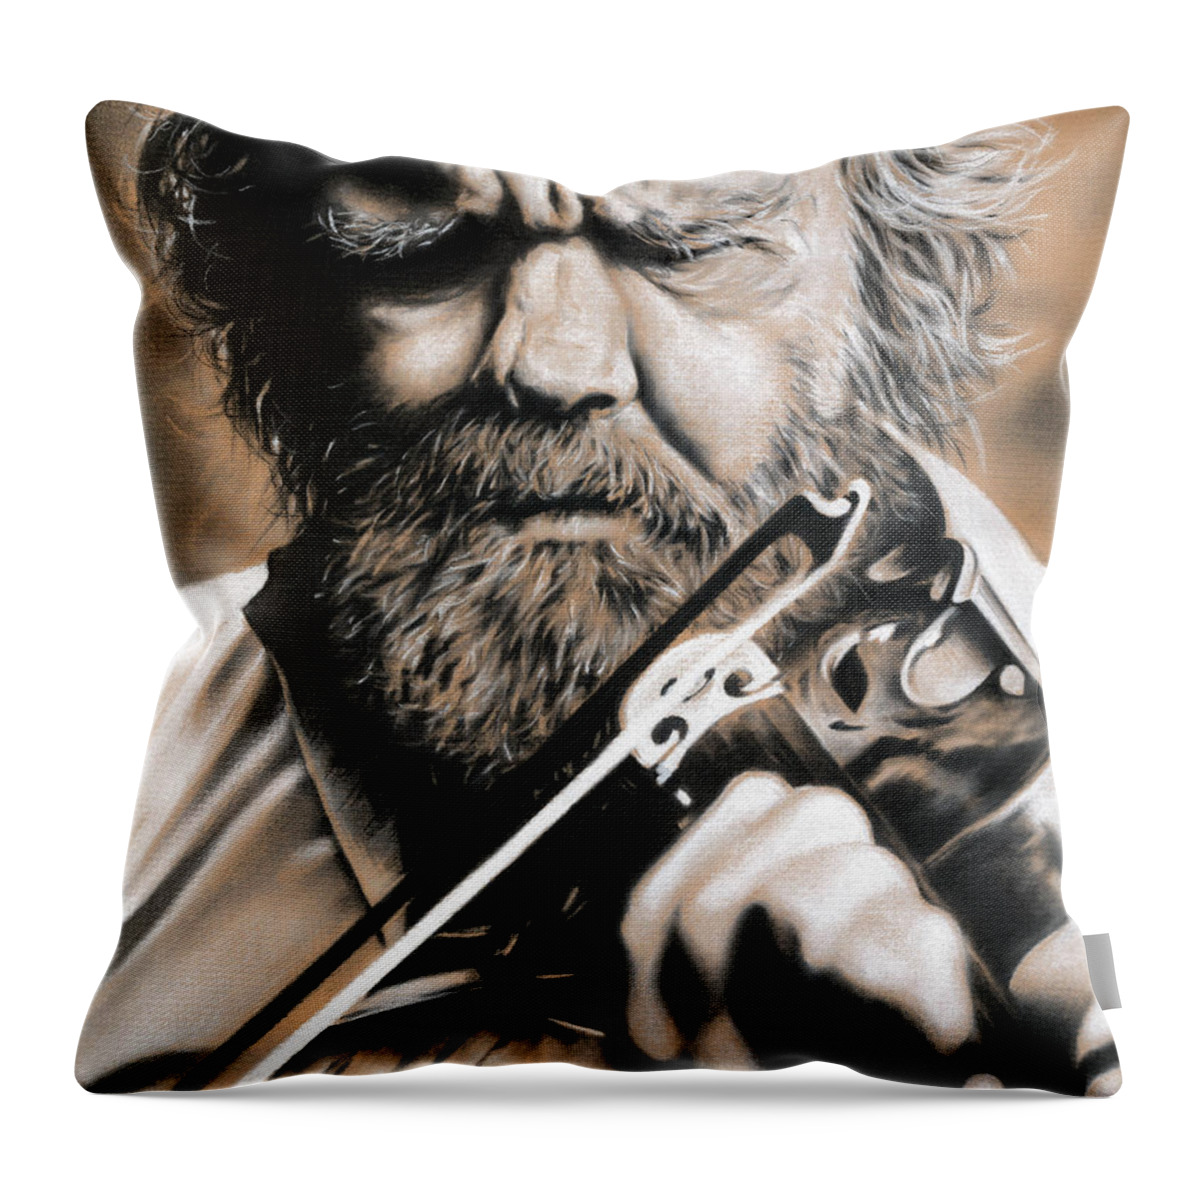 Musician Throw Pillow featuring the drawing Whole Life for Music by Natasha Denger